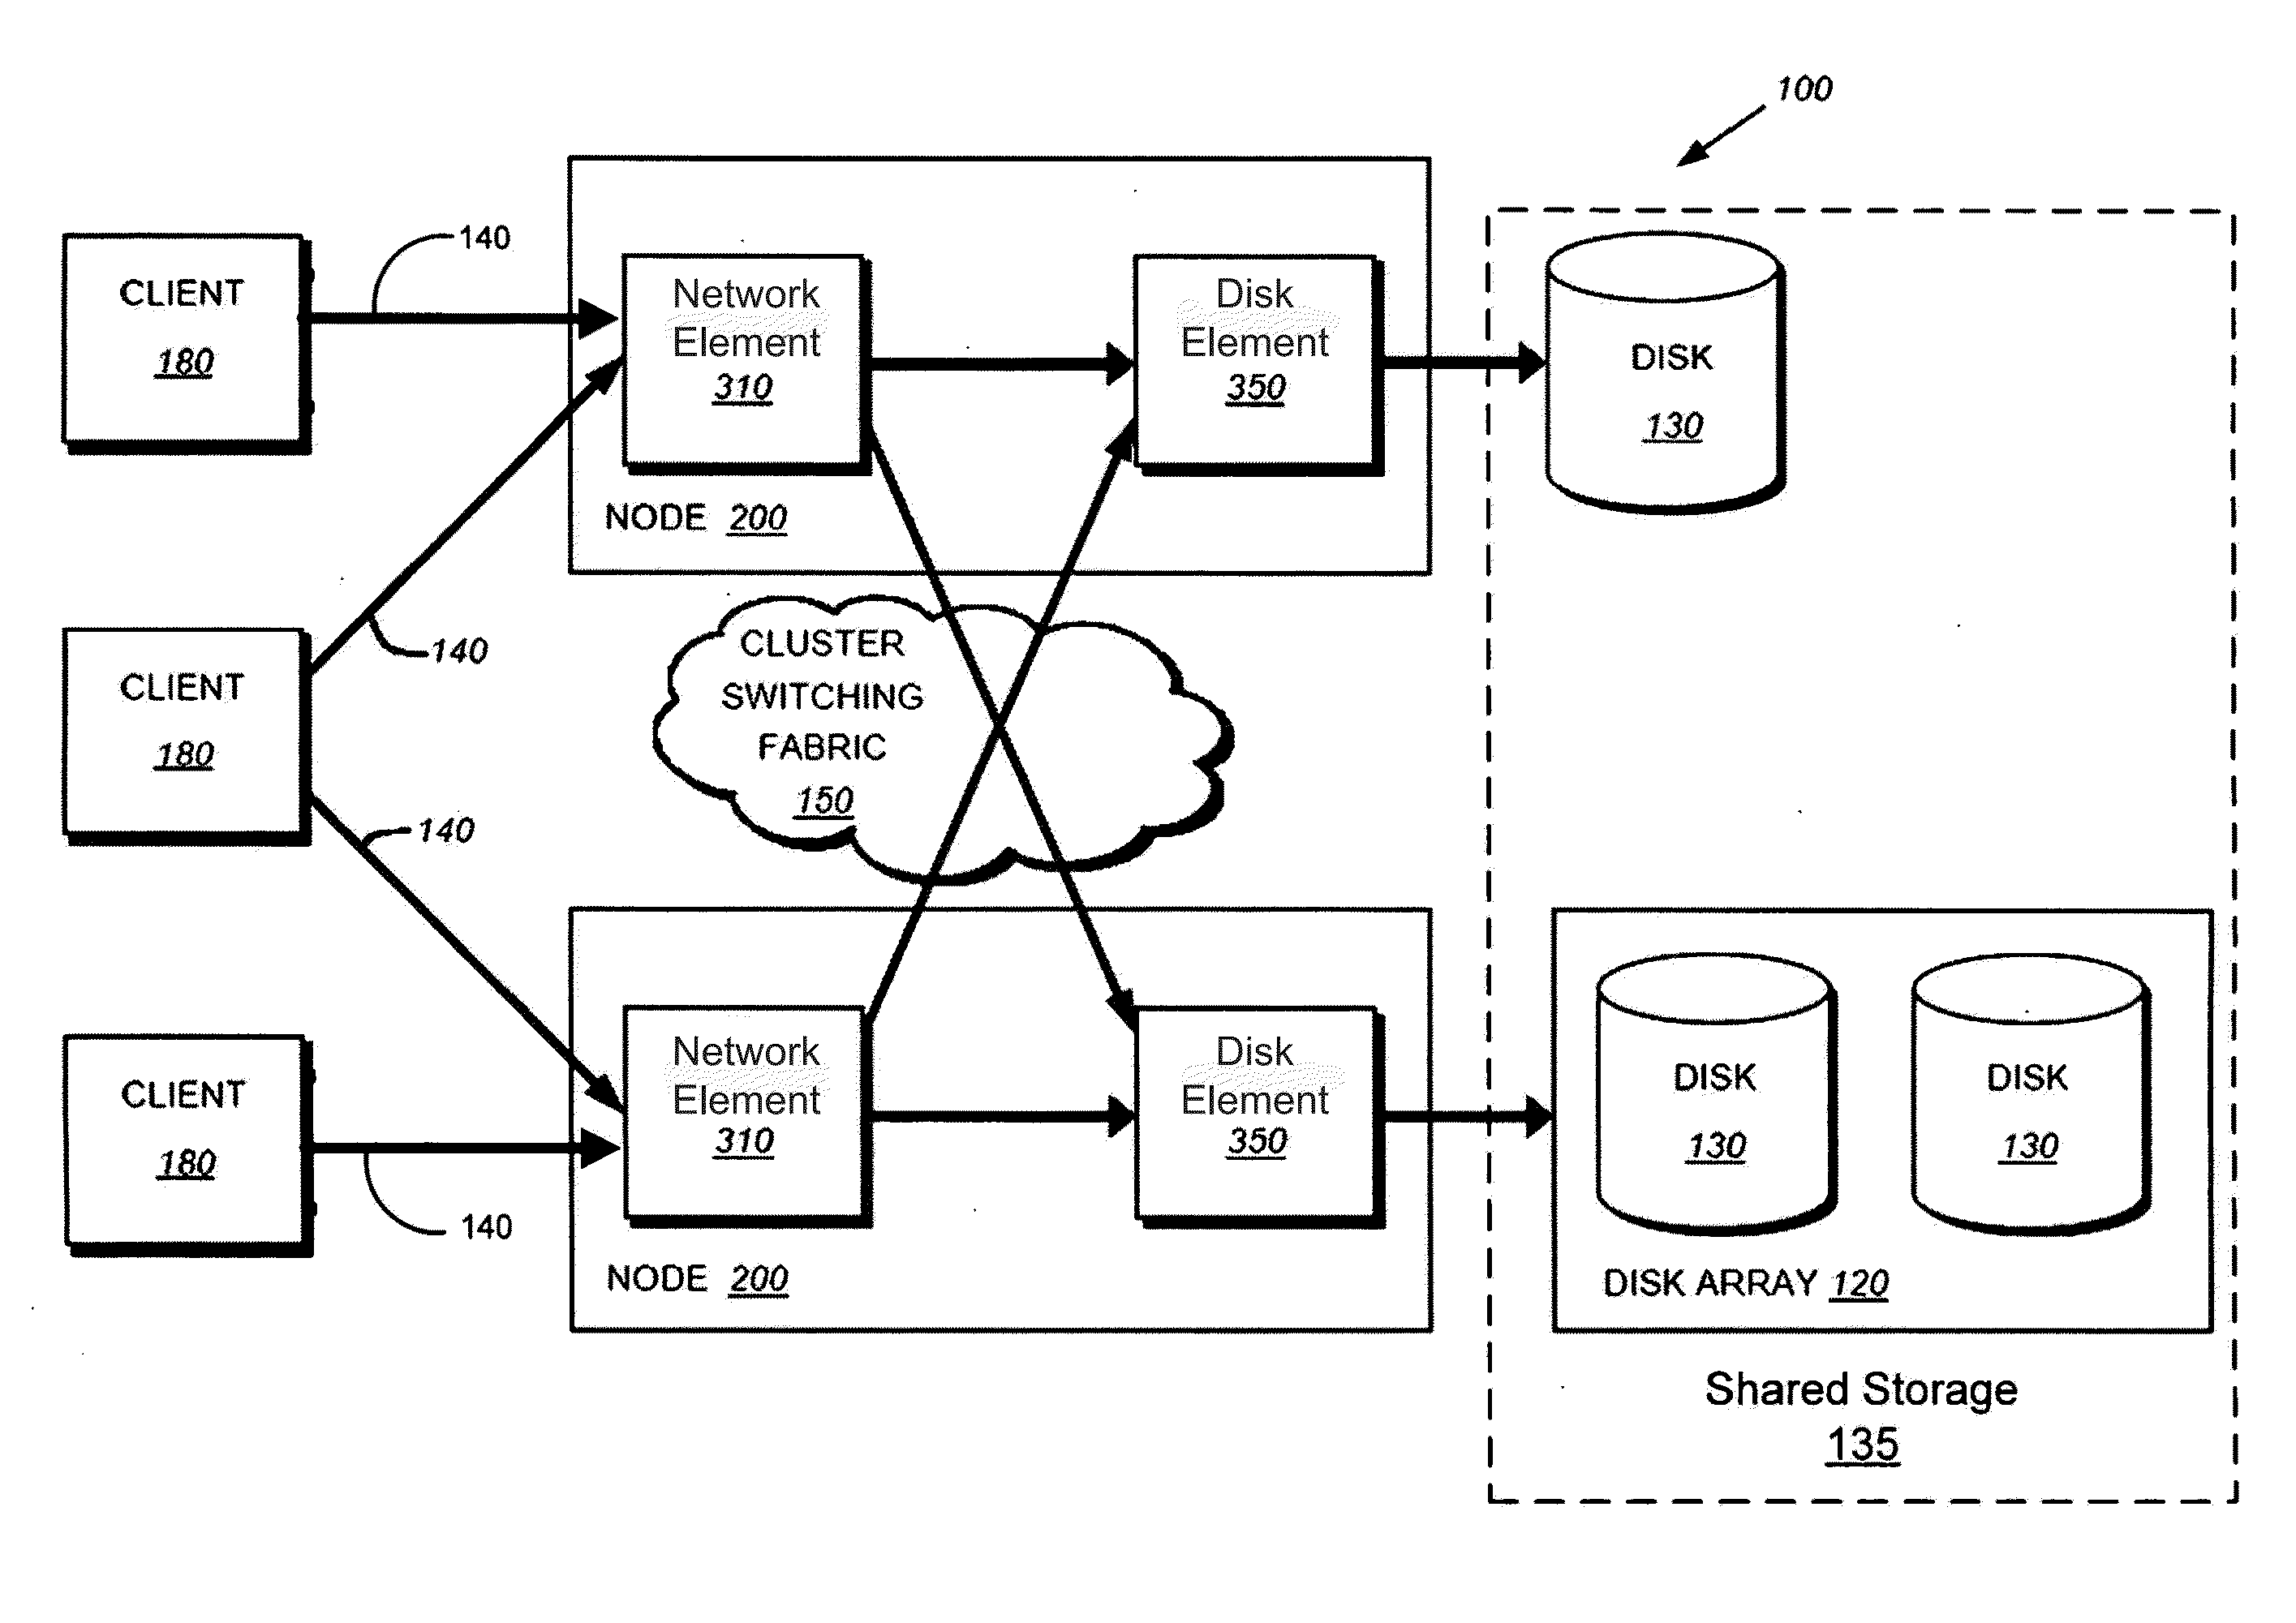 Servicing of Network Software Components of Nodes of a Cluster Storage System